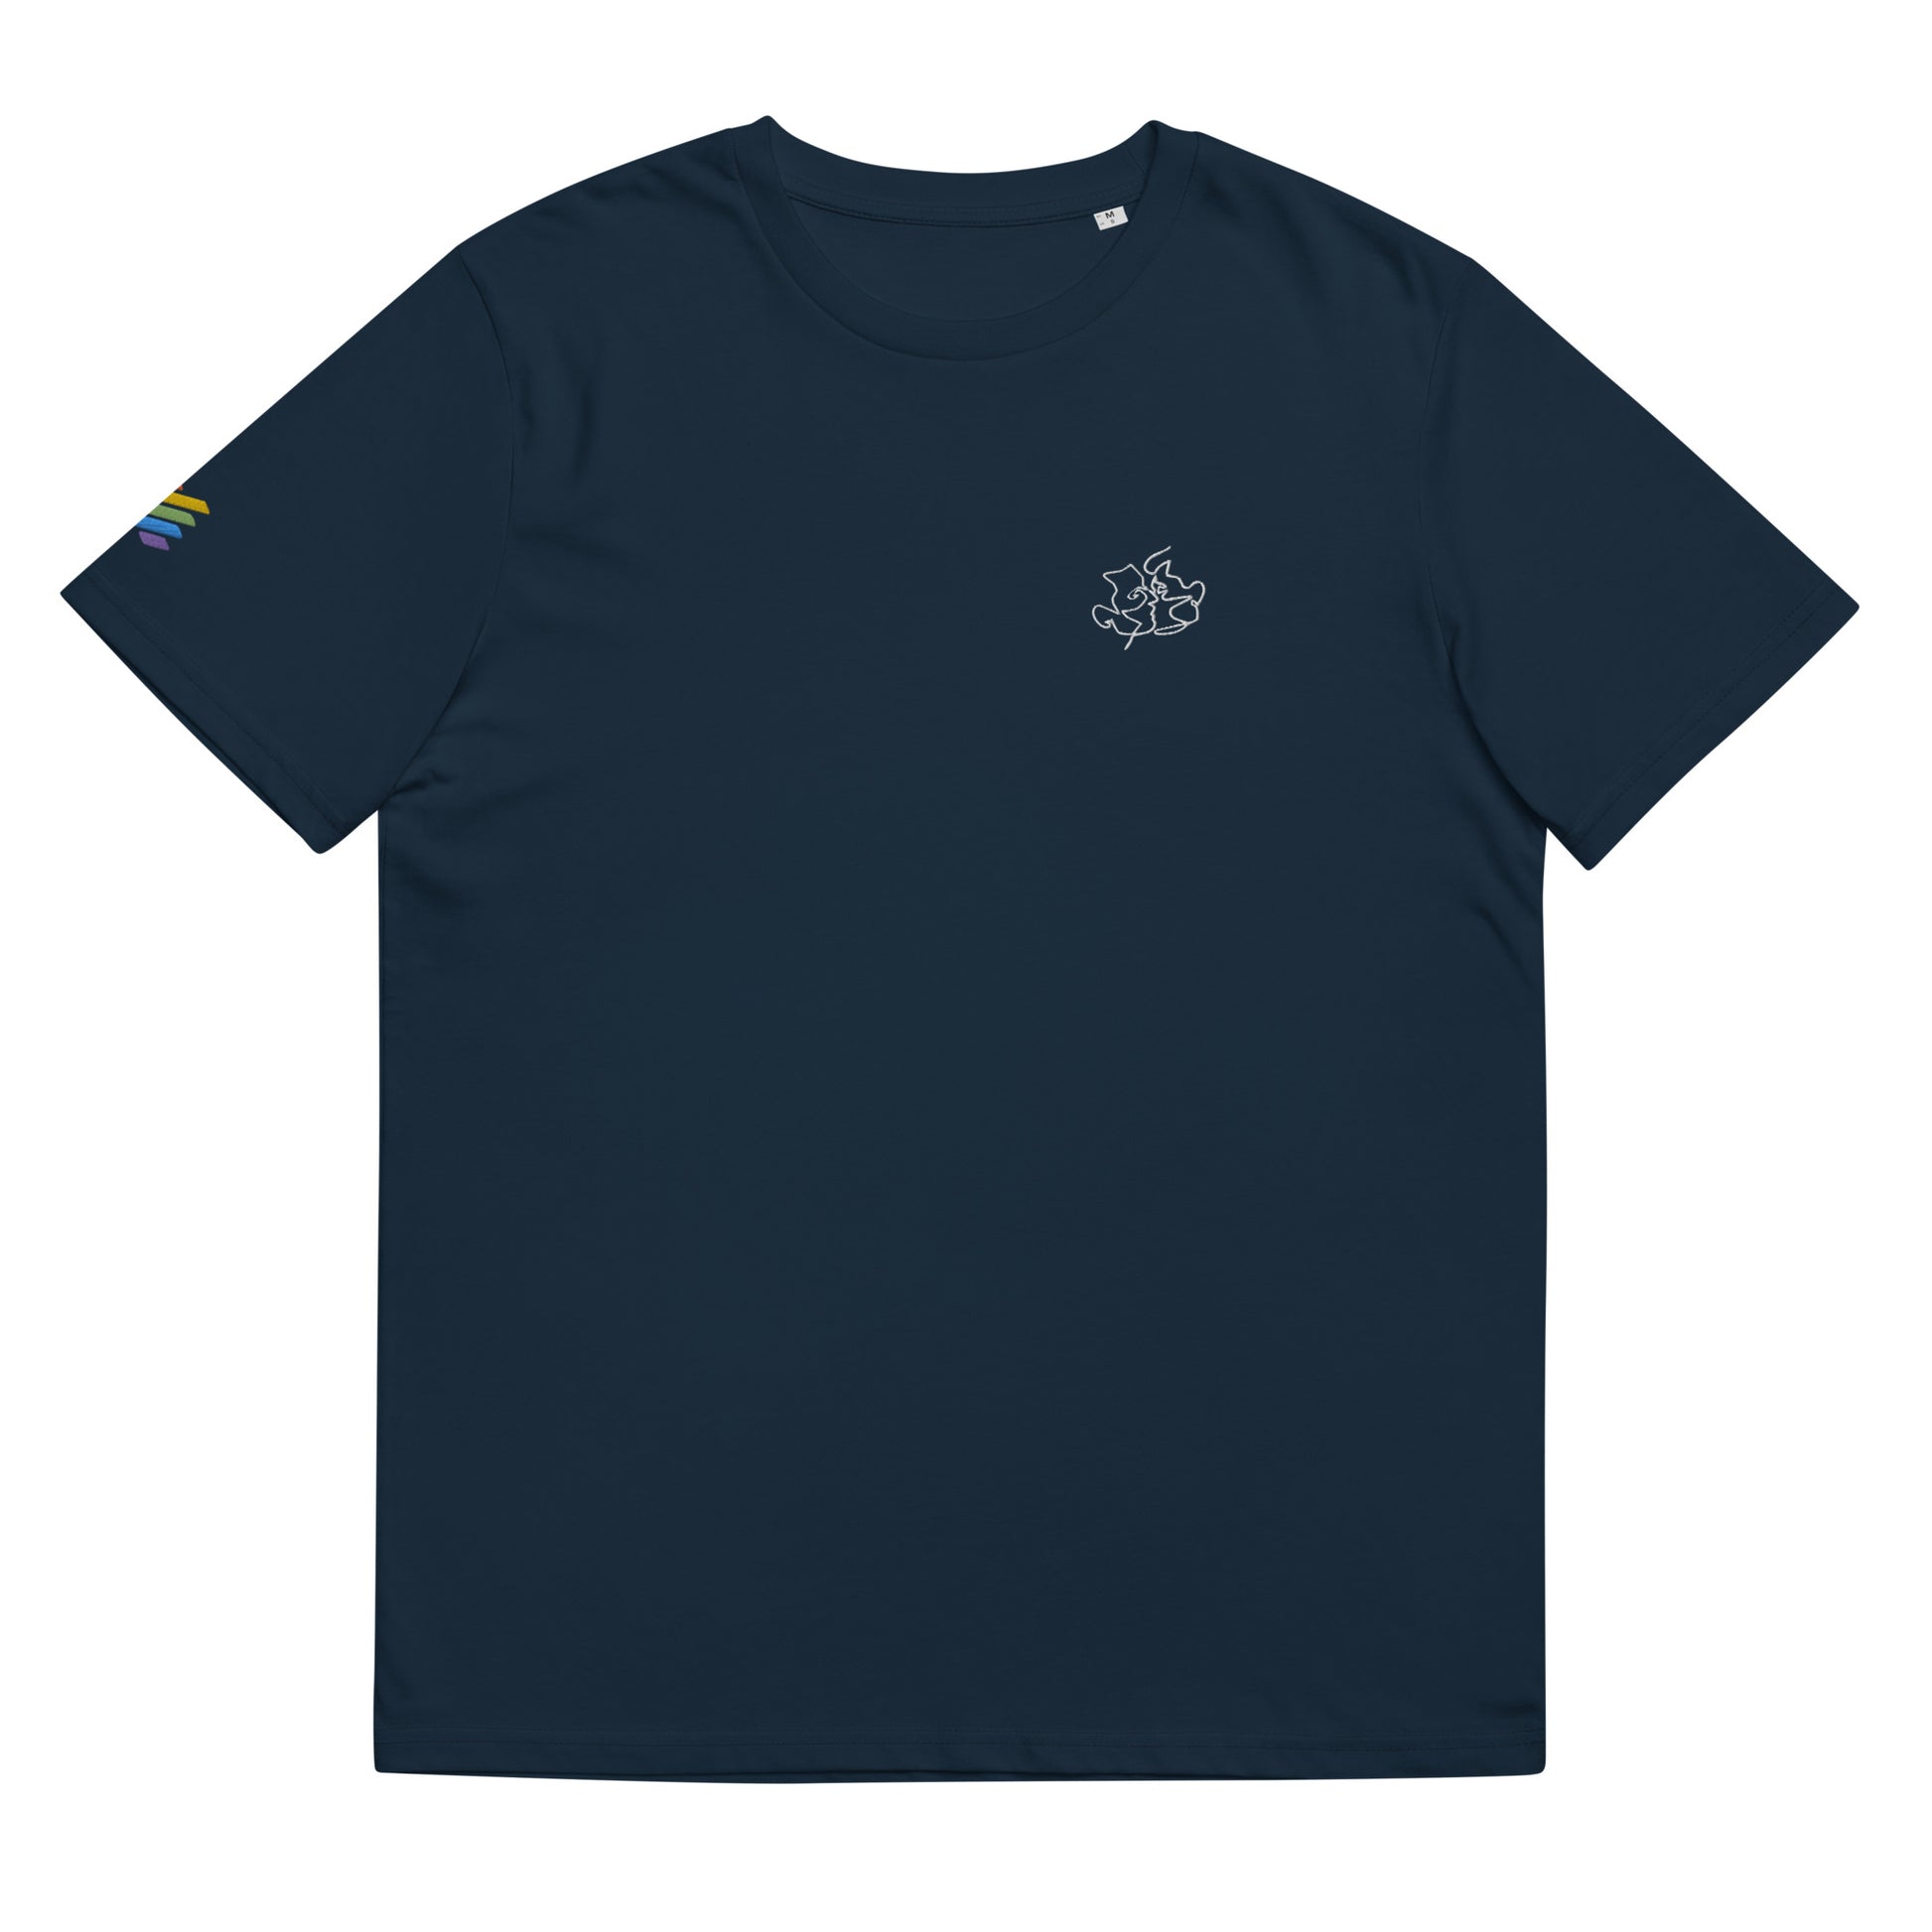 Fitted french navy blue organic cotton t-shirt with a small embroidered line art of two men kissing on the left chest, and an embroidered pride rainbow flag on the right sleeve. Available in sizes S to 3XL.